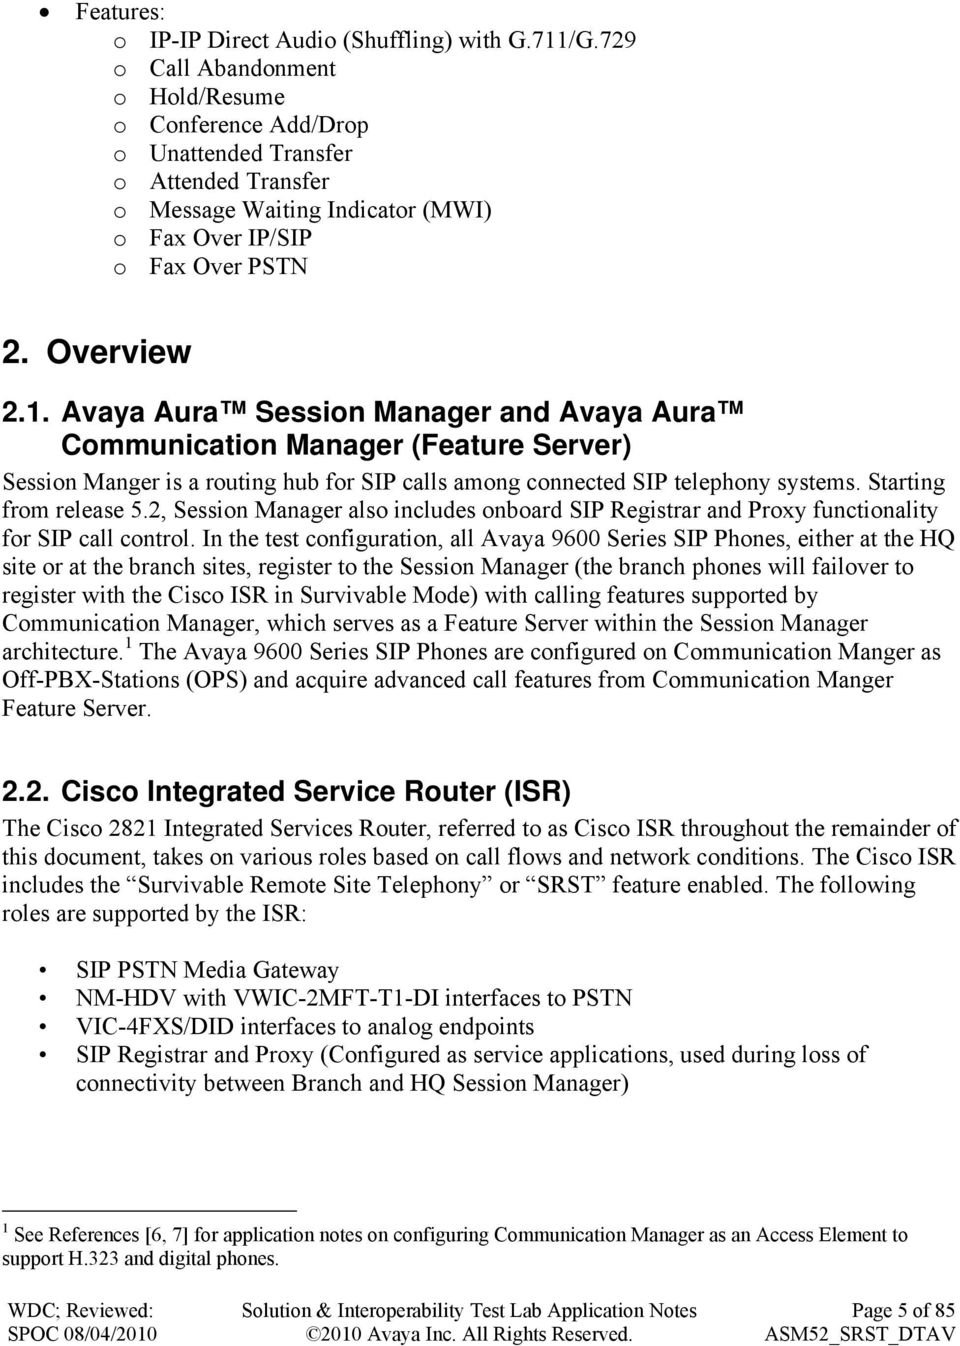 Avaya Aura Session Manager and Avaya Aura Communication Manager (Feature Server) Session Manger is a routing hub for SIP calls among connected SIP telephony systems. Starting from release 5.